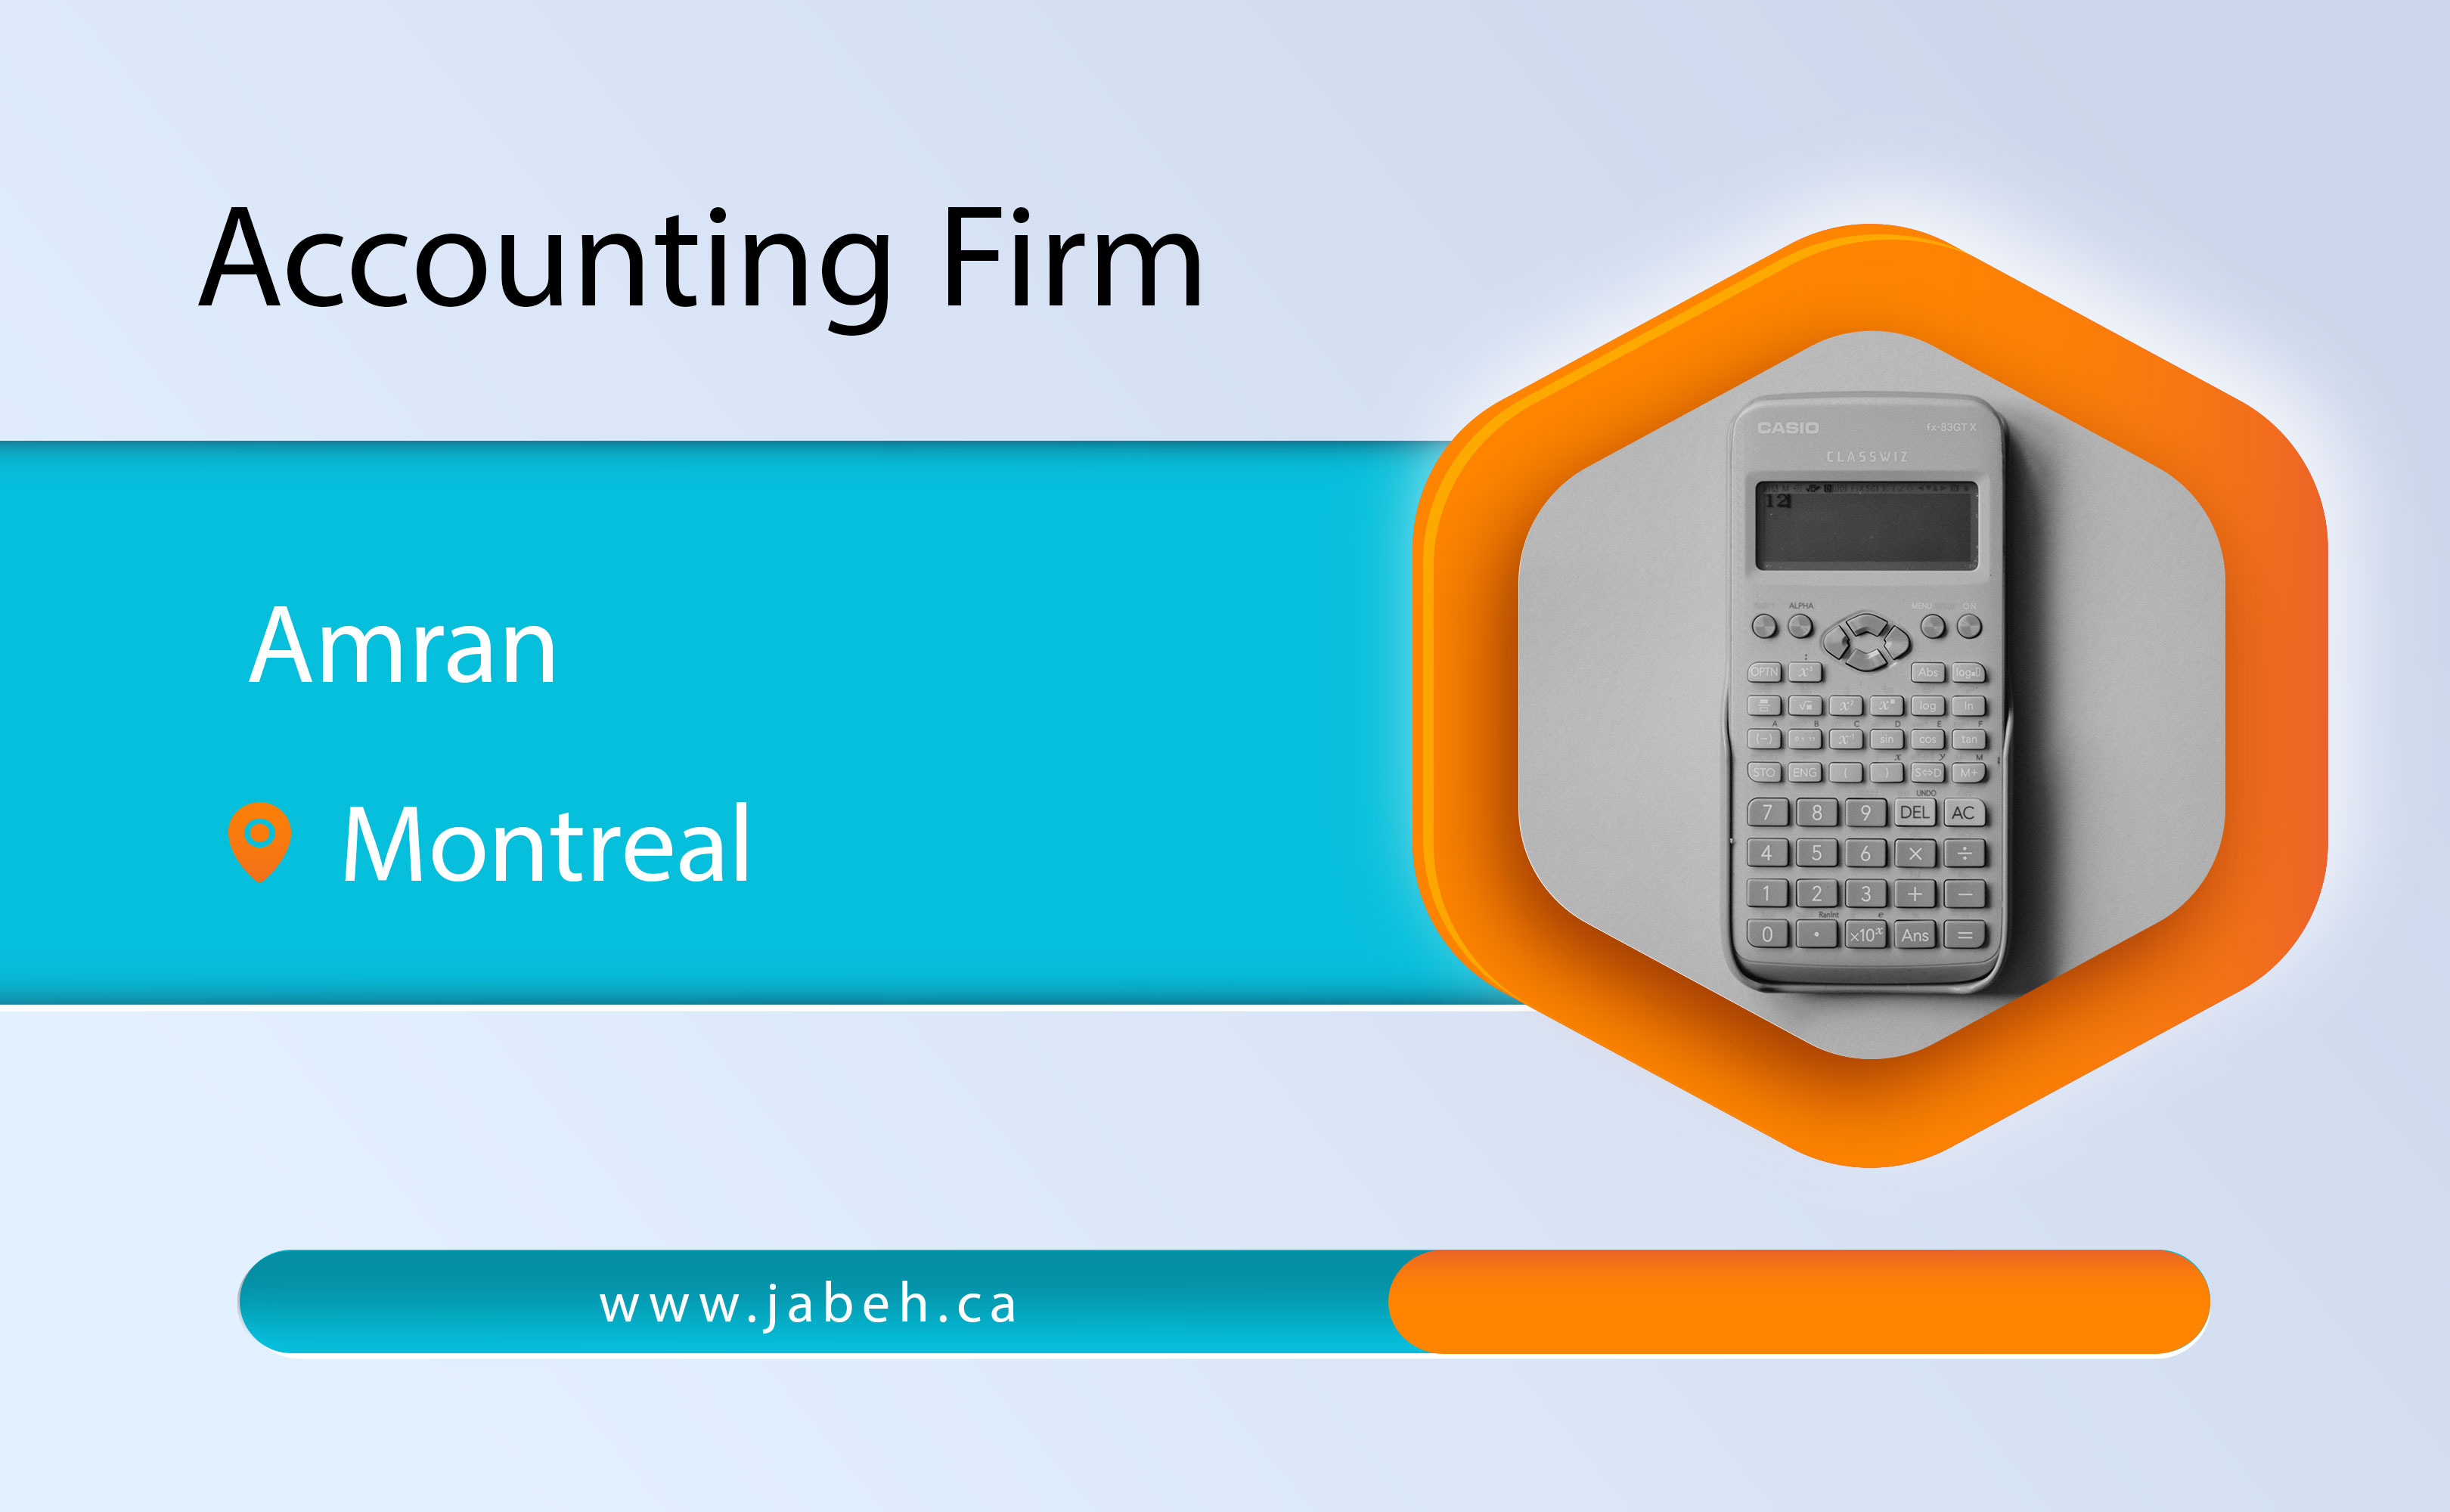 Ameran accounting company in Montreal